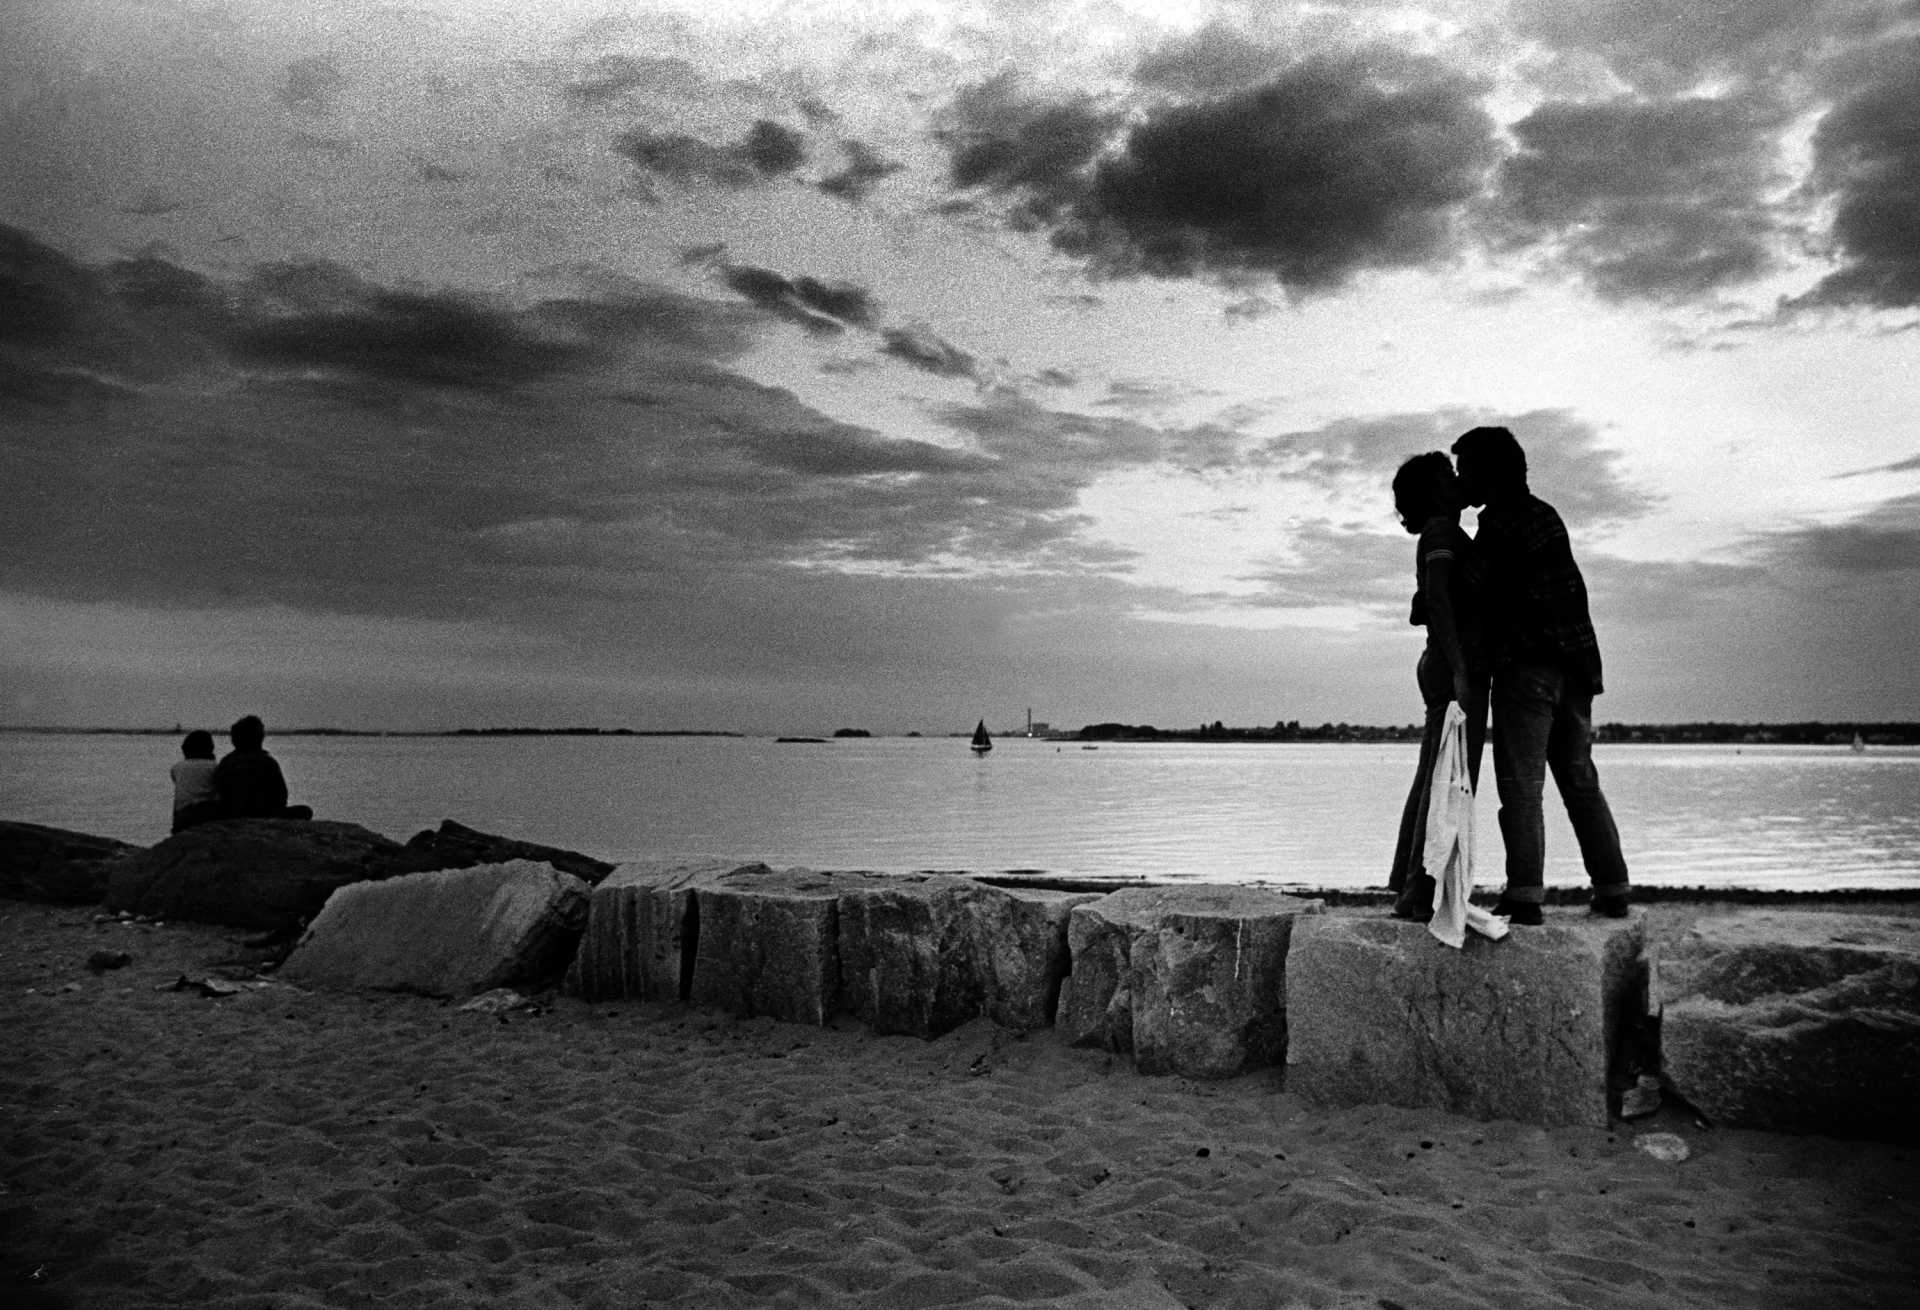 Lovers silhouetted on Compo Beach in Westport, Conn. 1970s